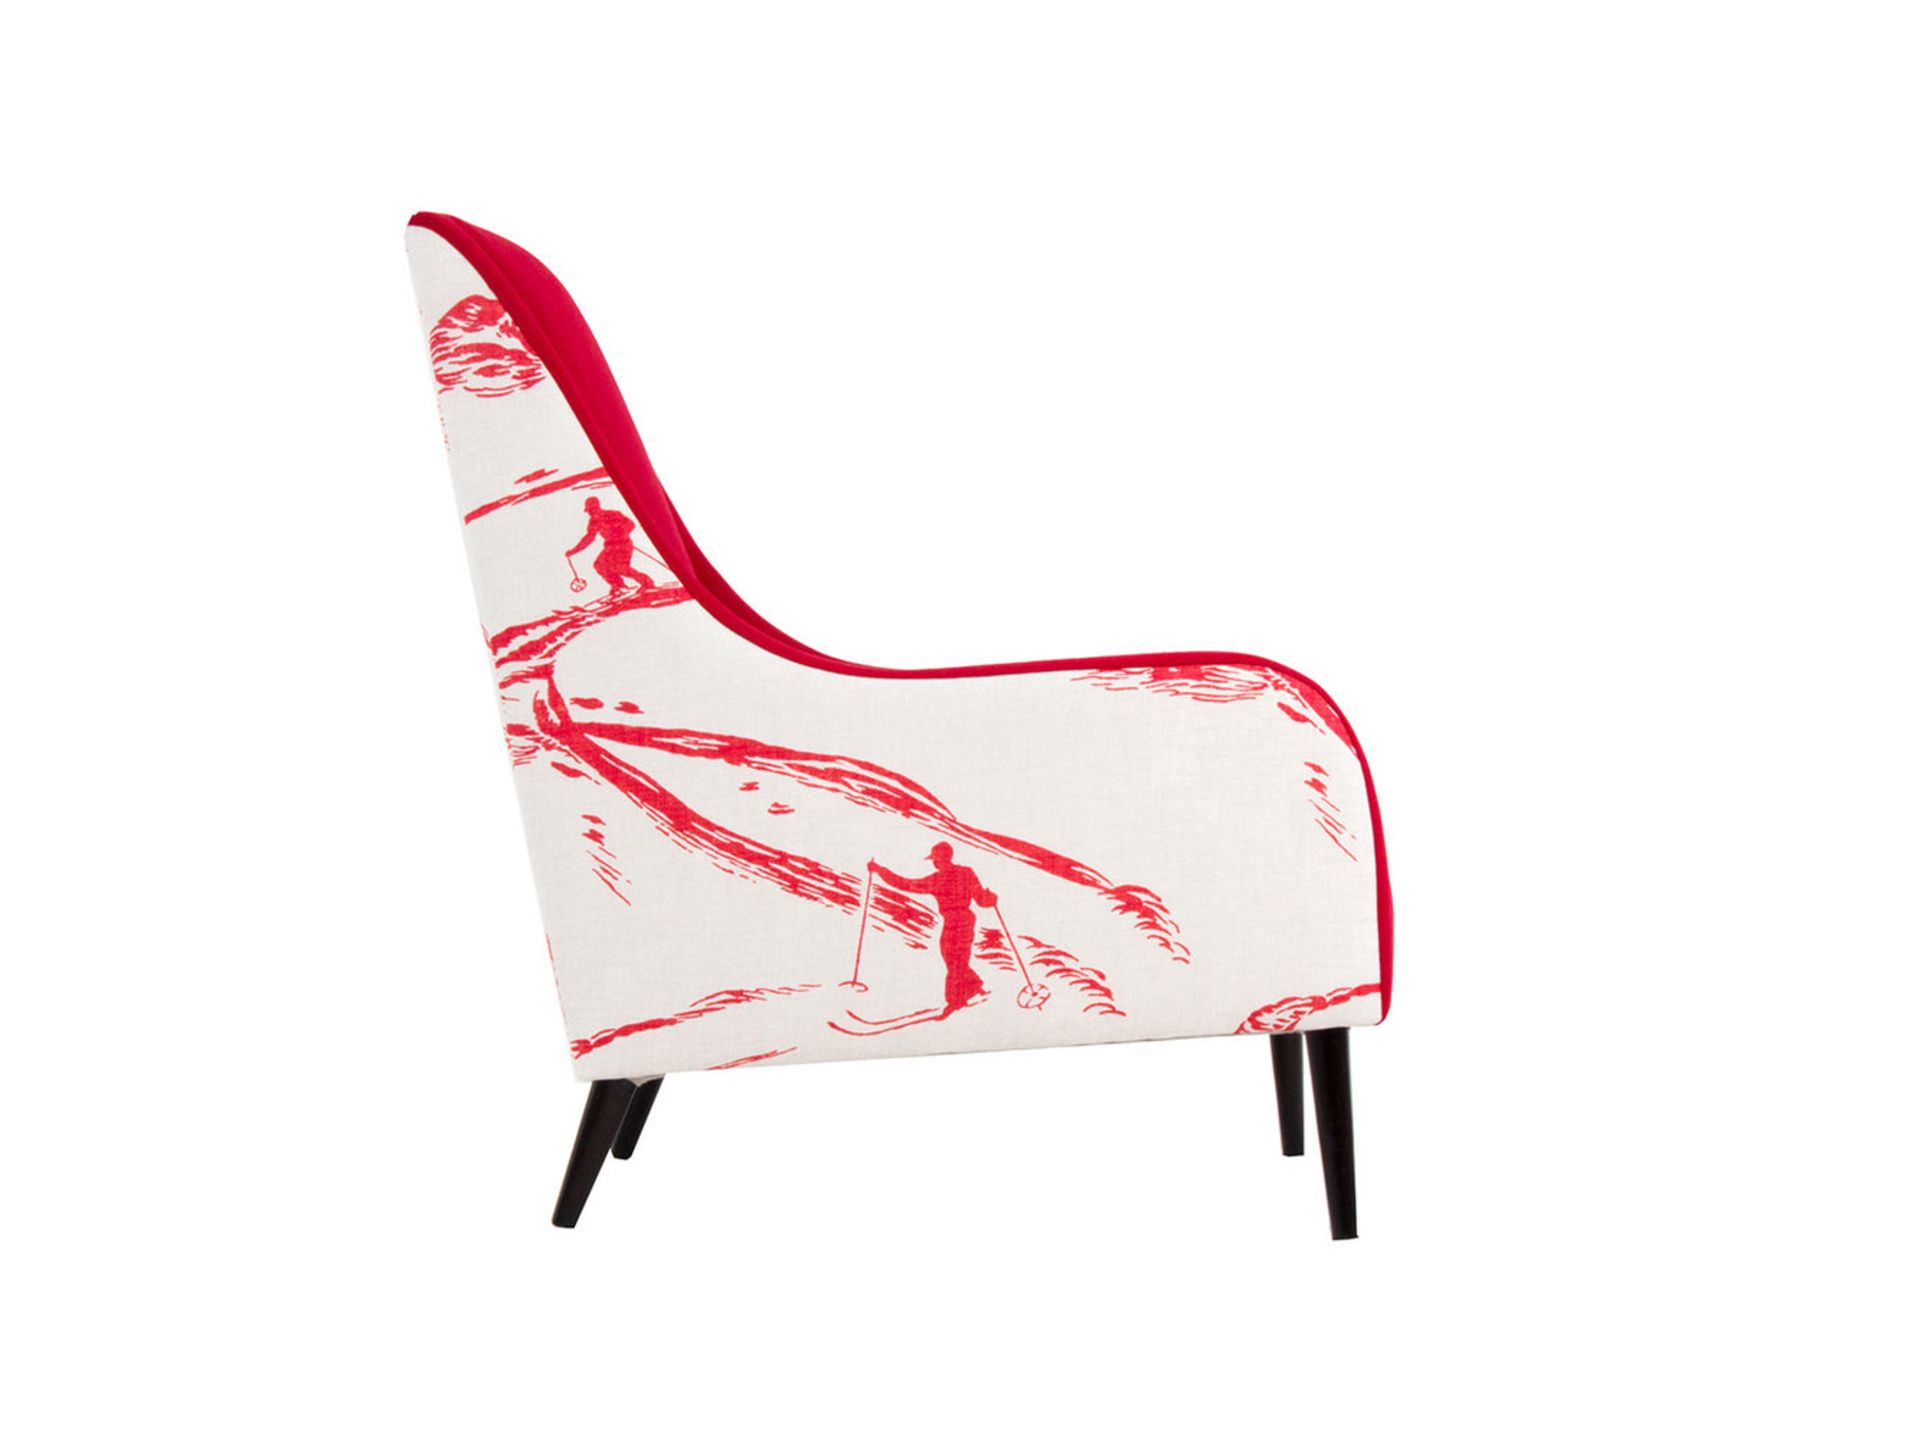 1 x Lauran Armchair Upholstered in Aviemore Skiing Fabric in Red and White - RRP £779! - Image 6 of 7